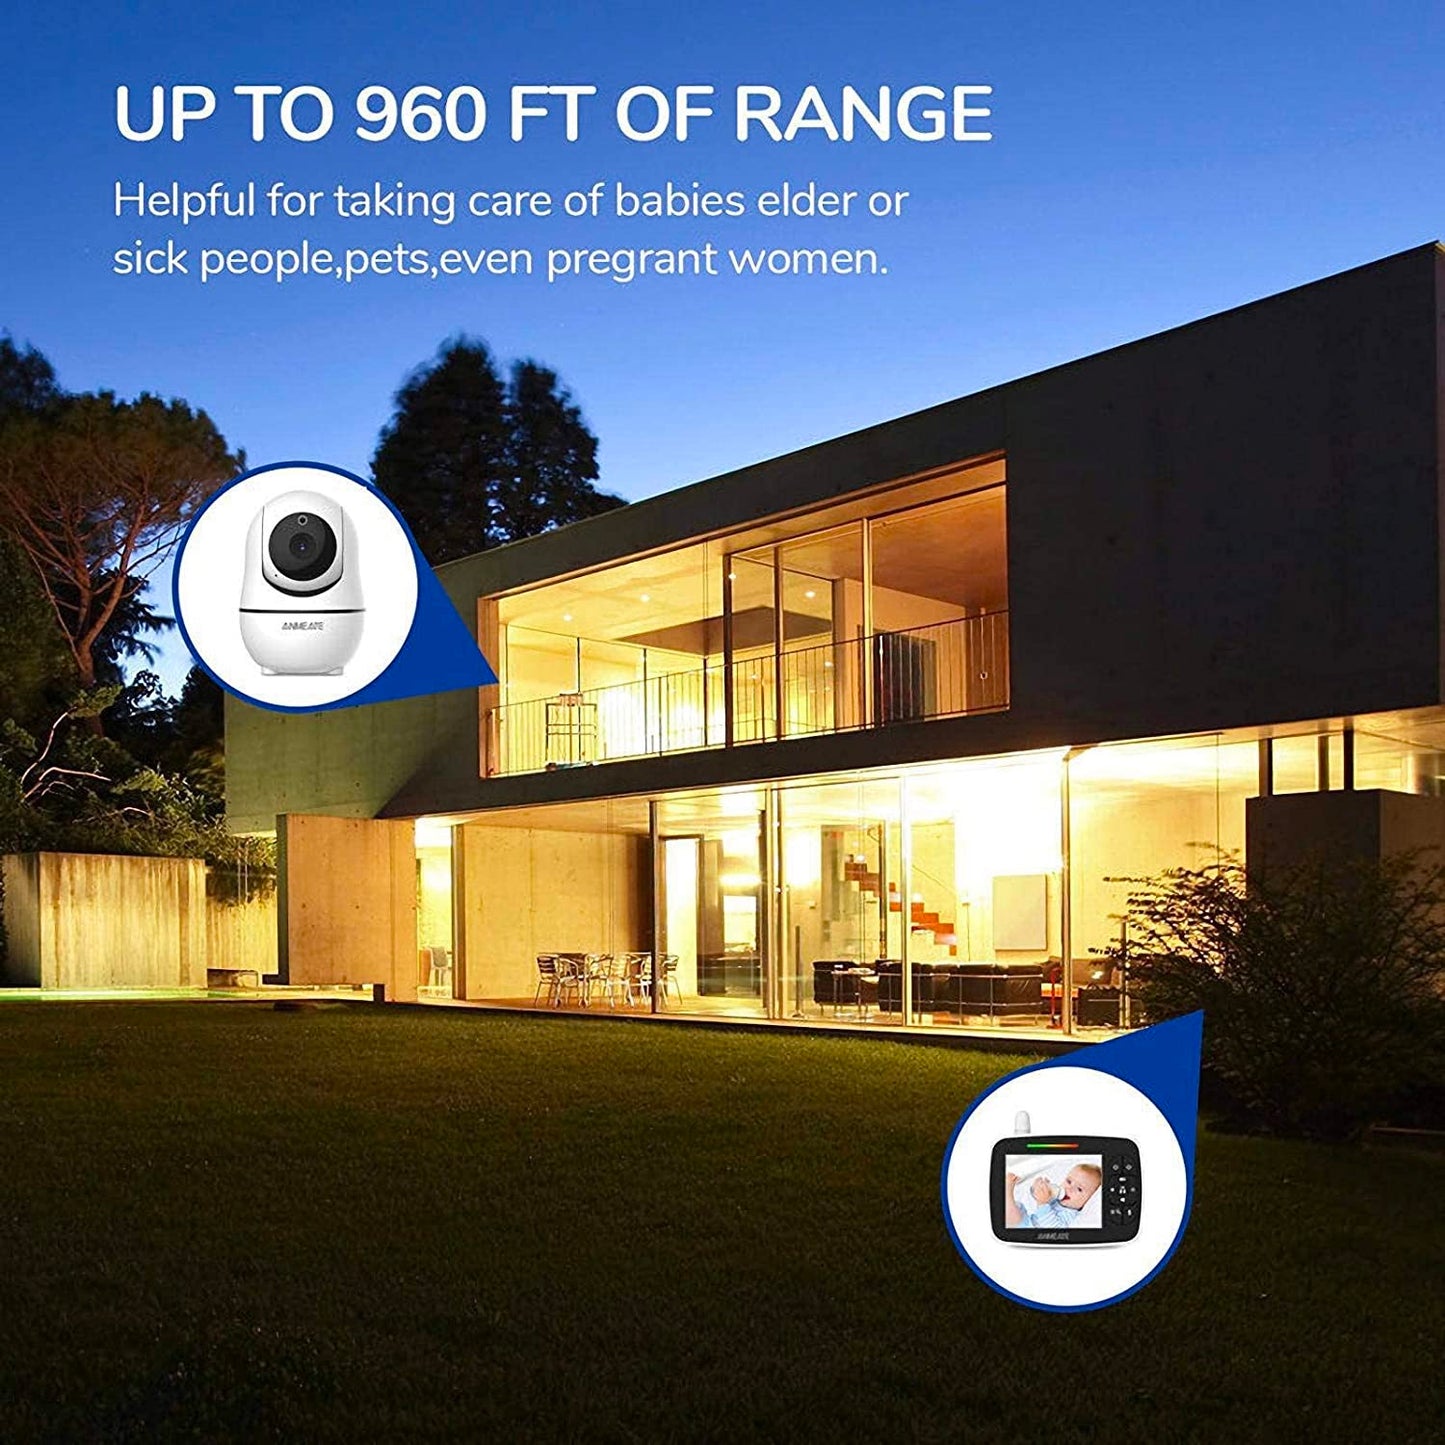 home with vision monitor up to 960 ft of range